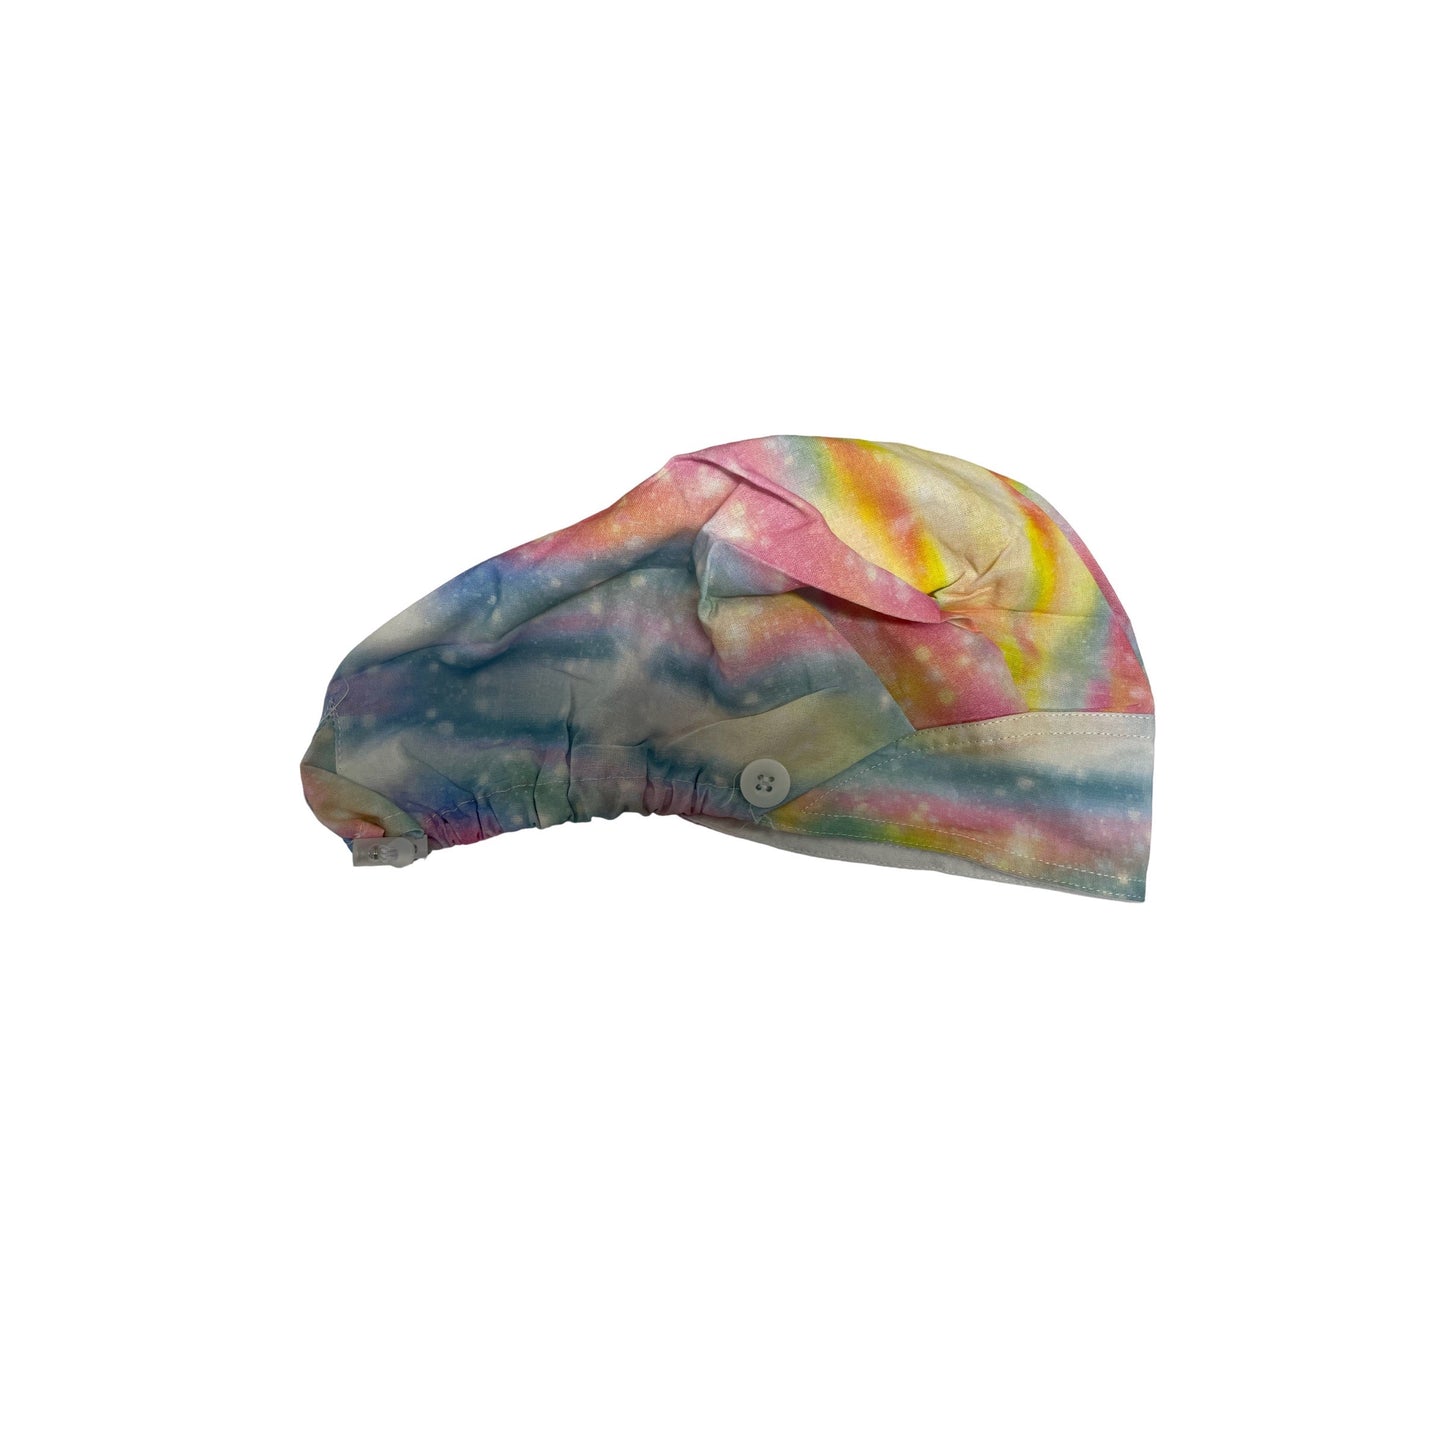 "Tie-Dye Hat collection"